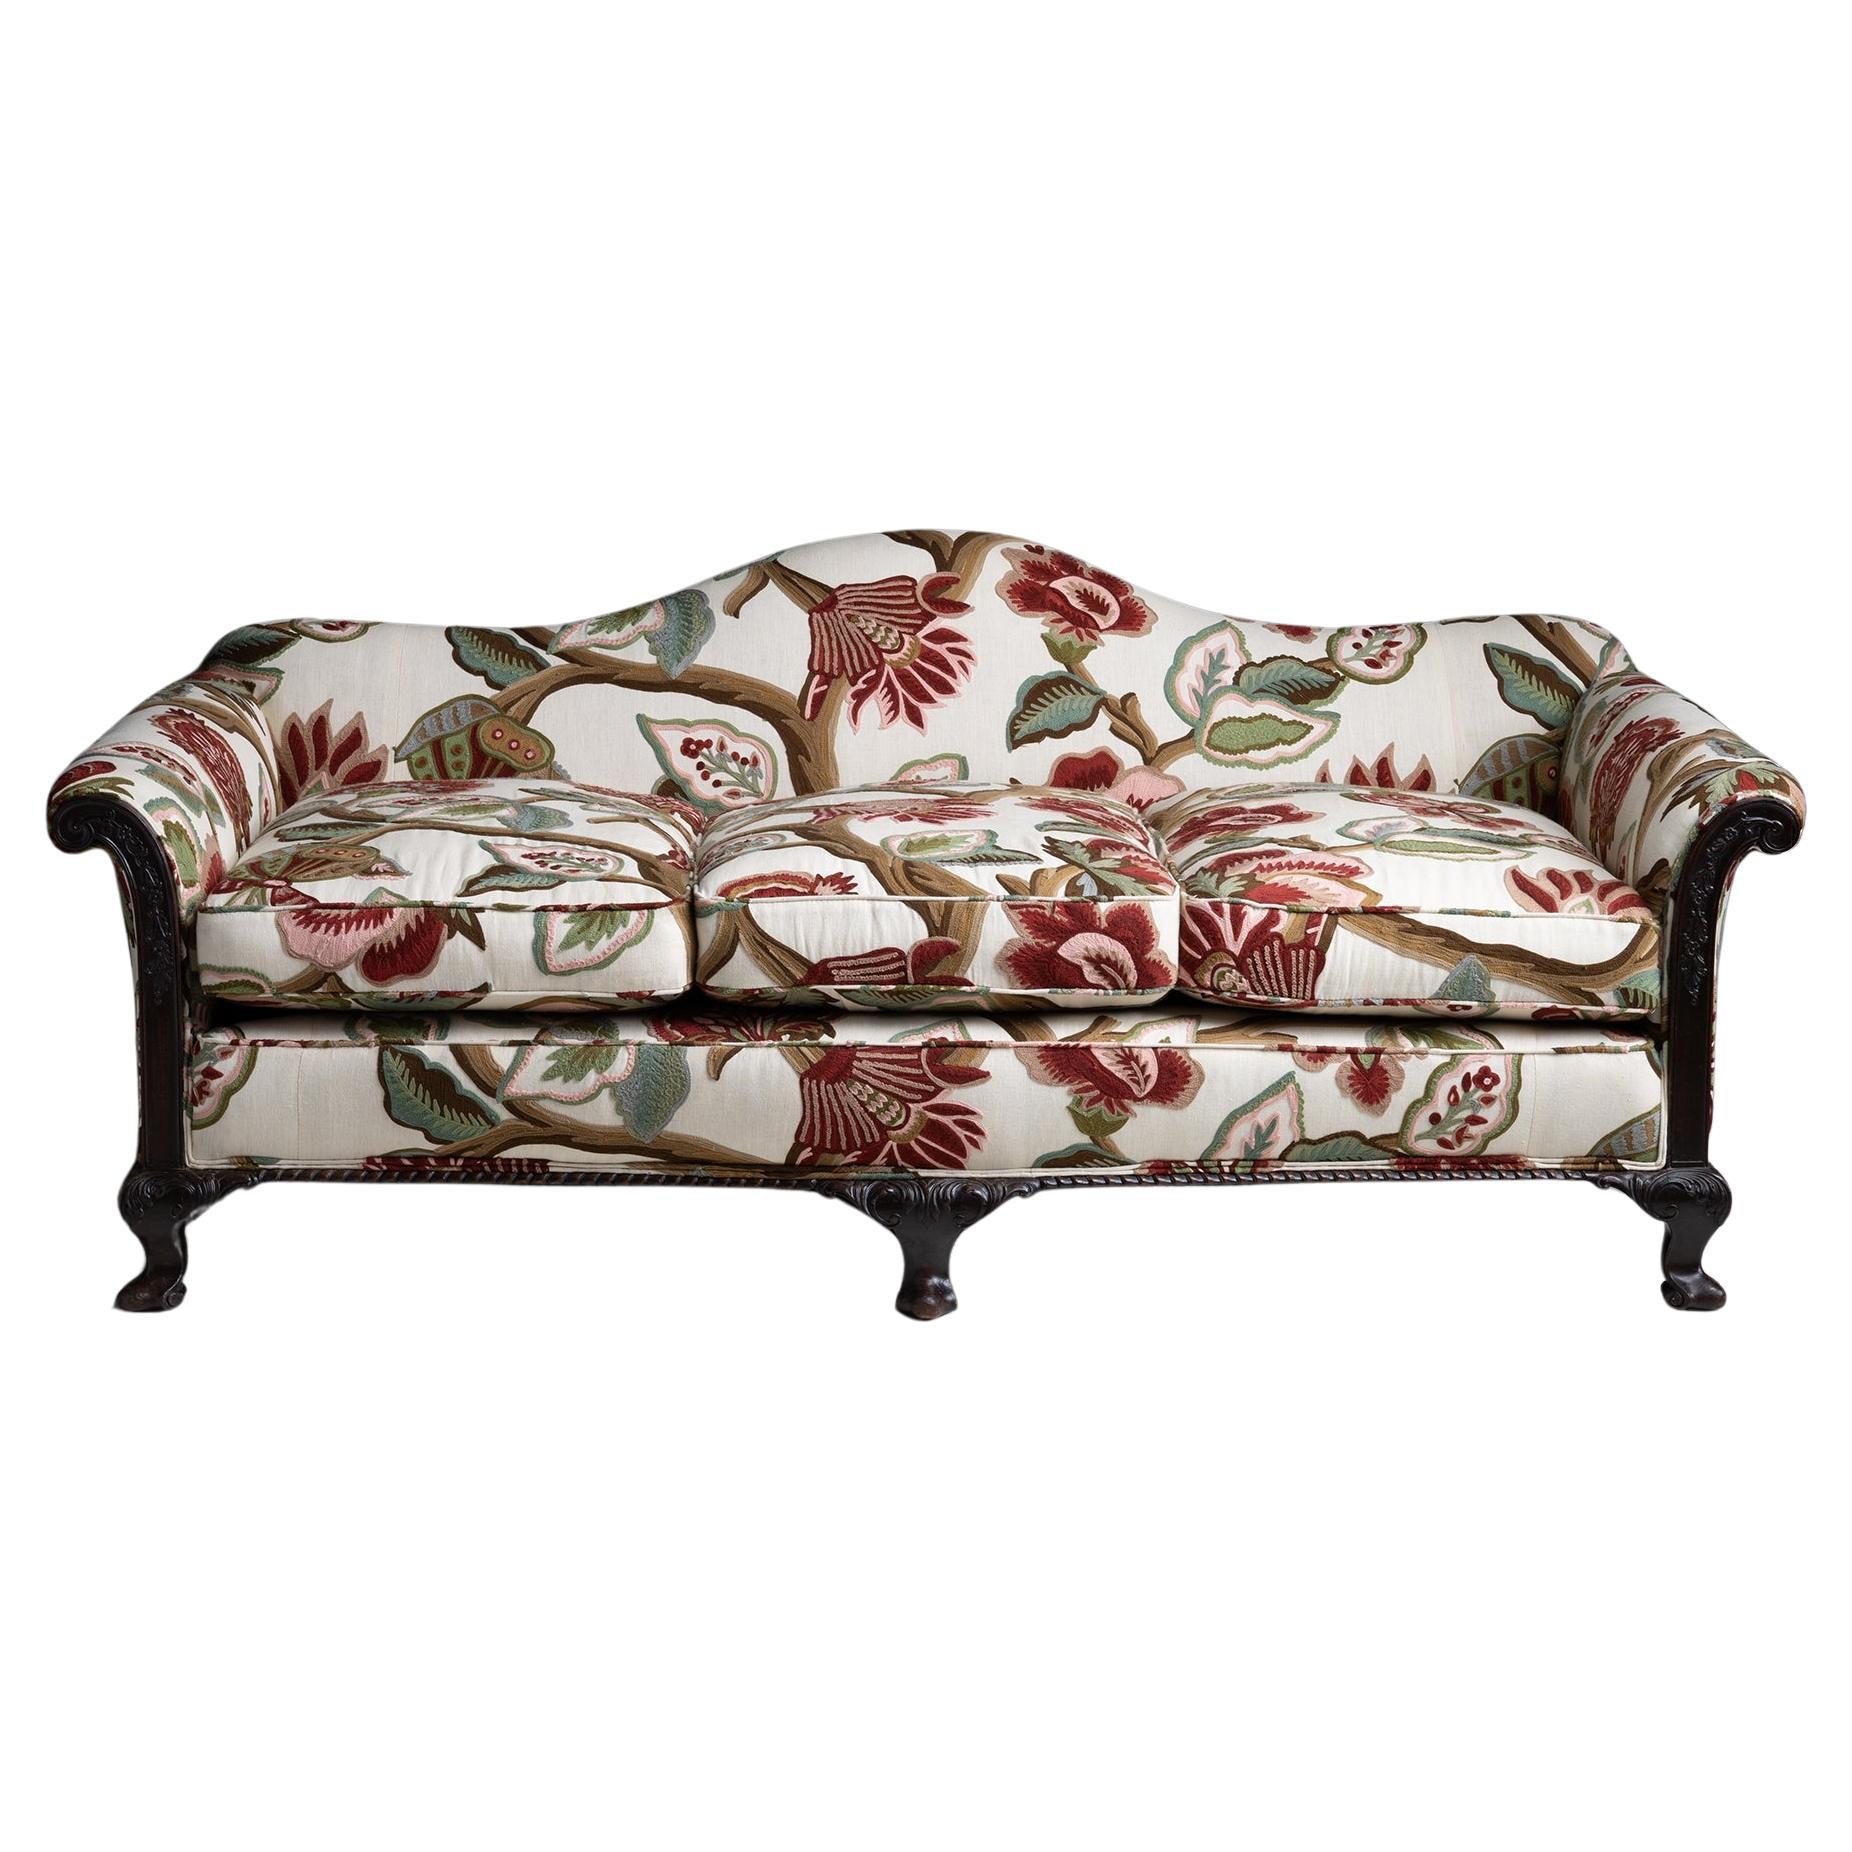 Sofa in Embroidered Linen by Pierre Frey, England circa 1900 For Sale